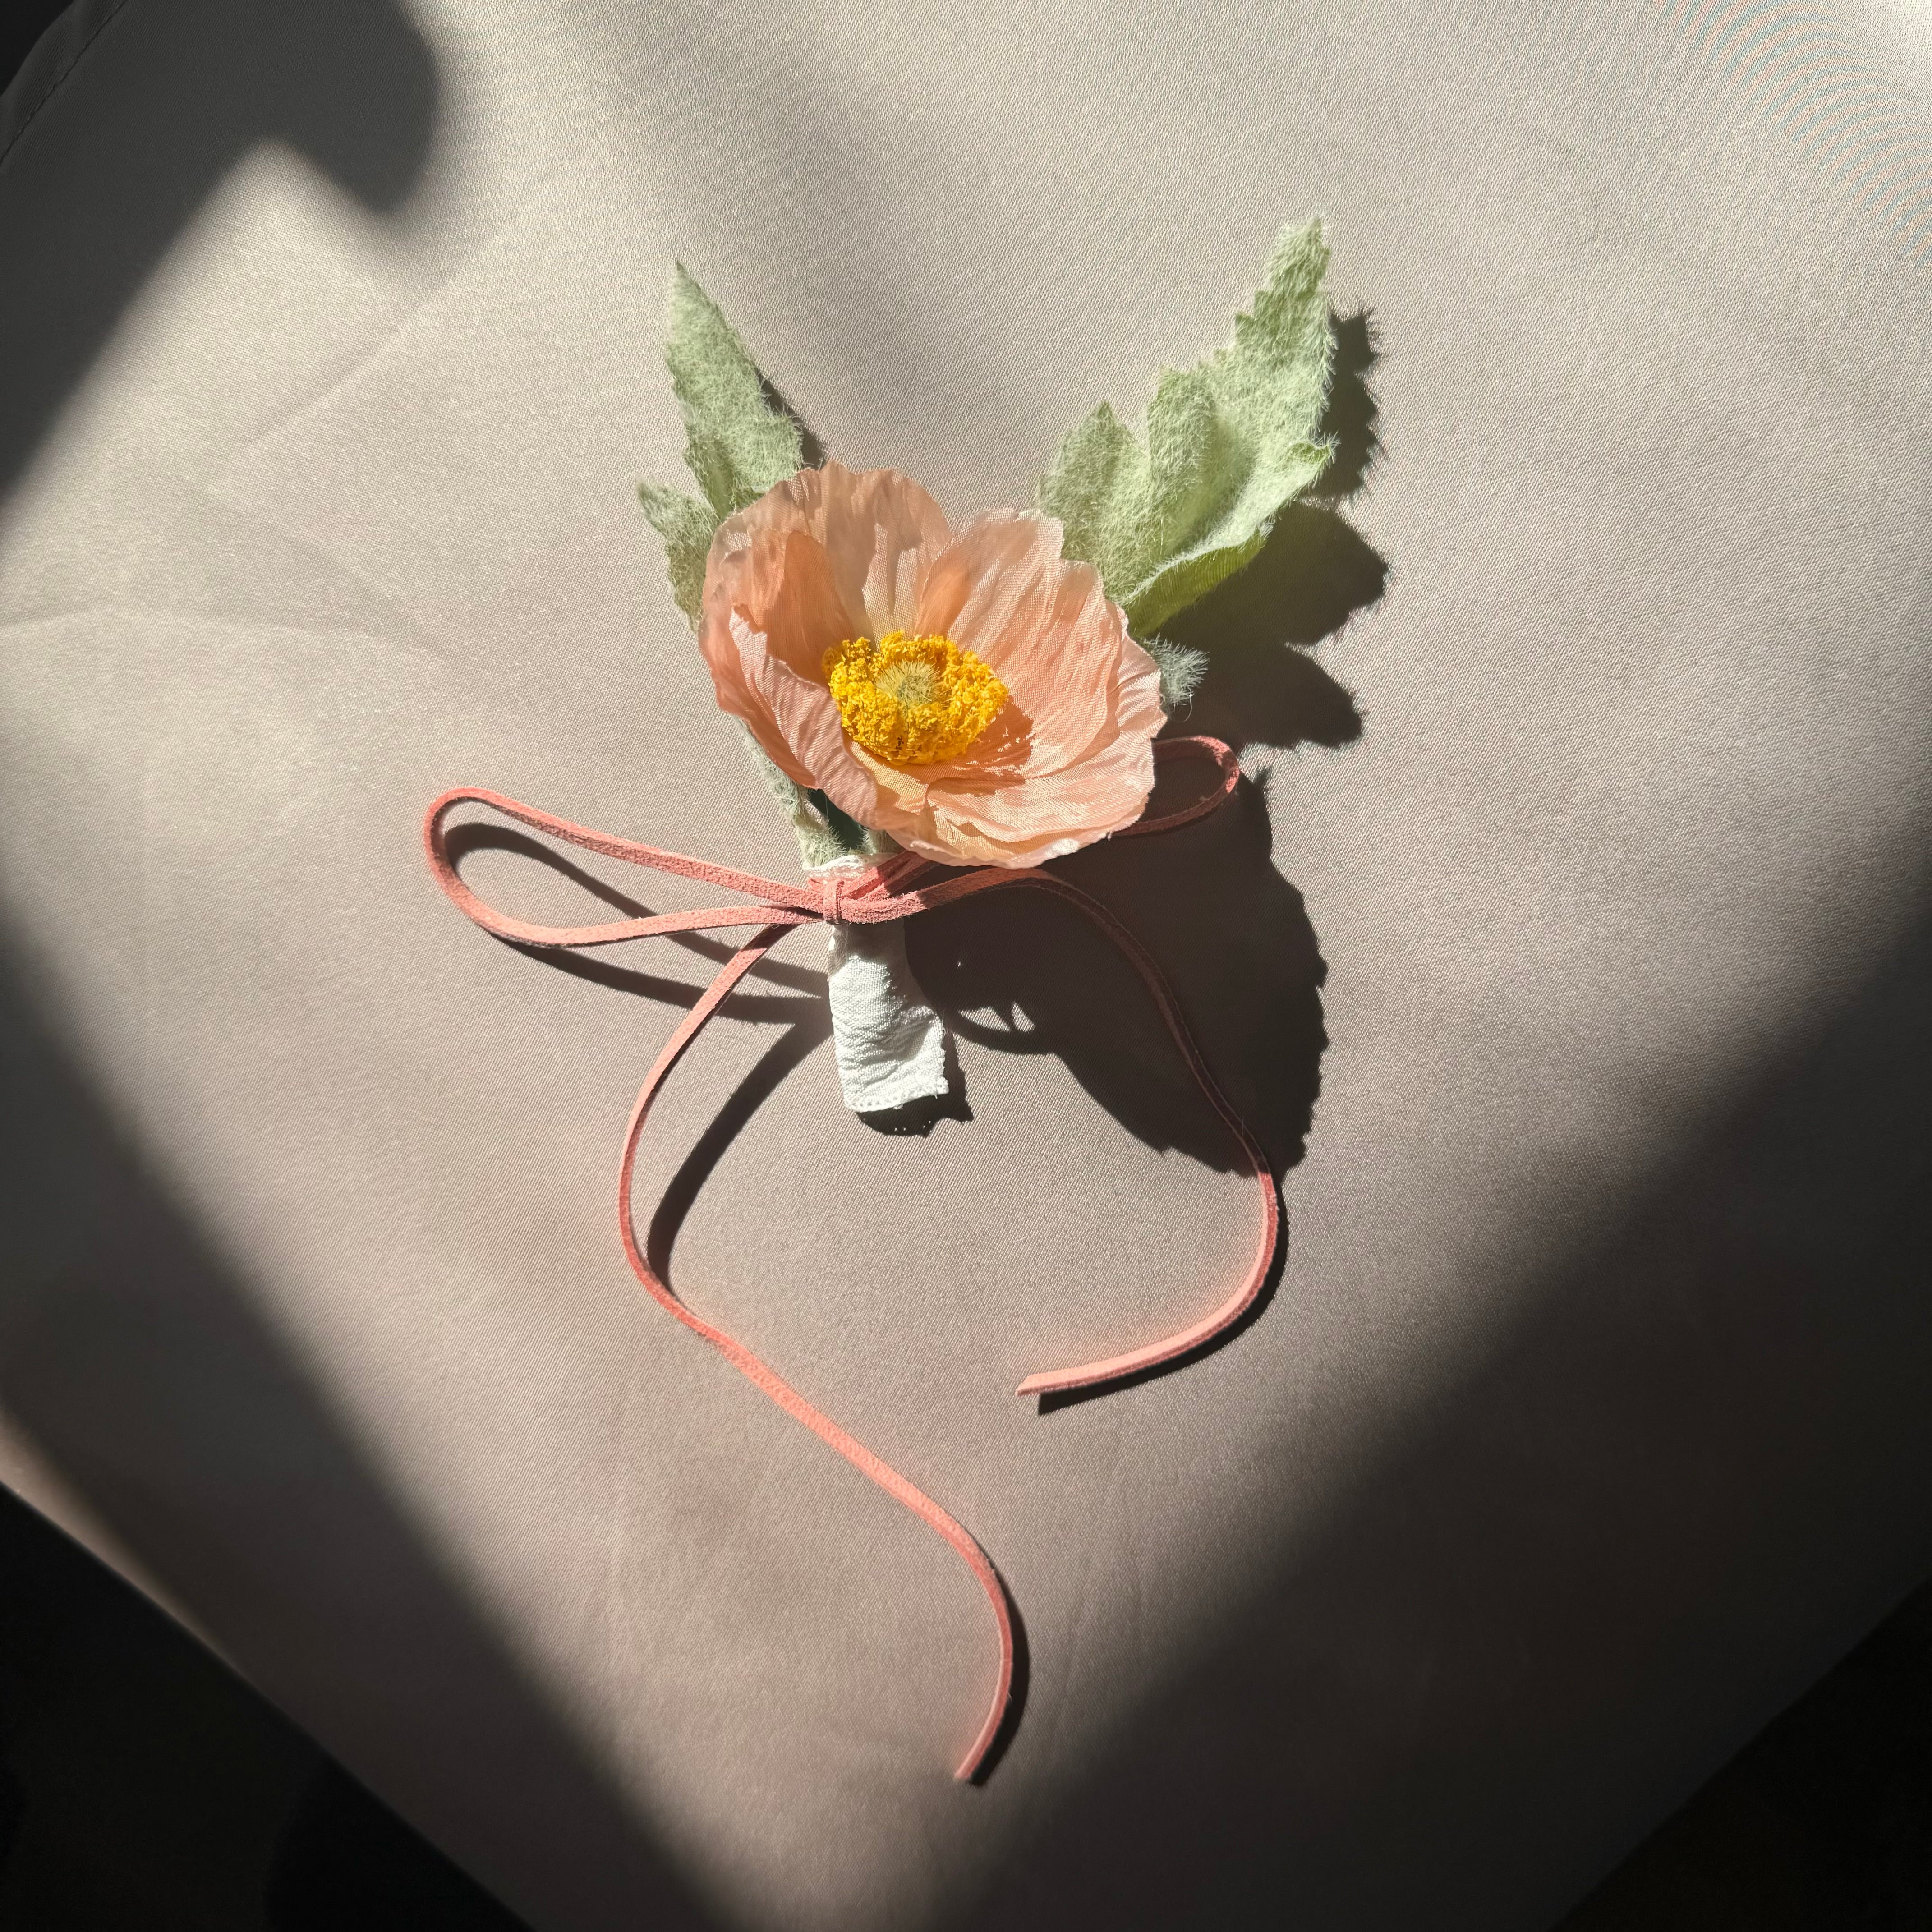 Spring Fling - Buttonhole (2 styles)